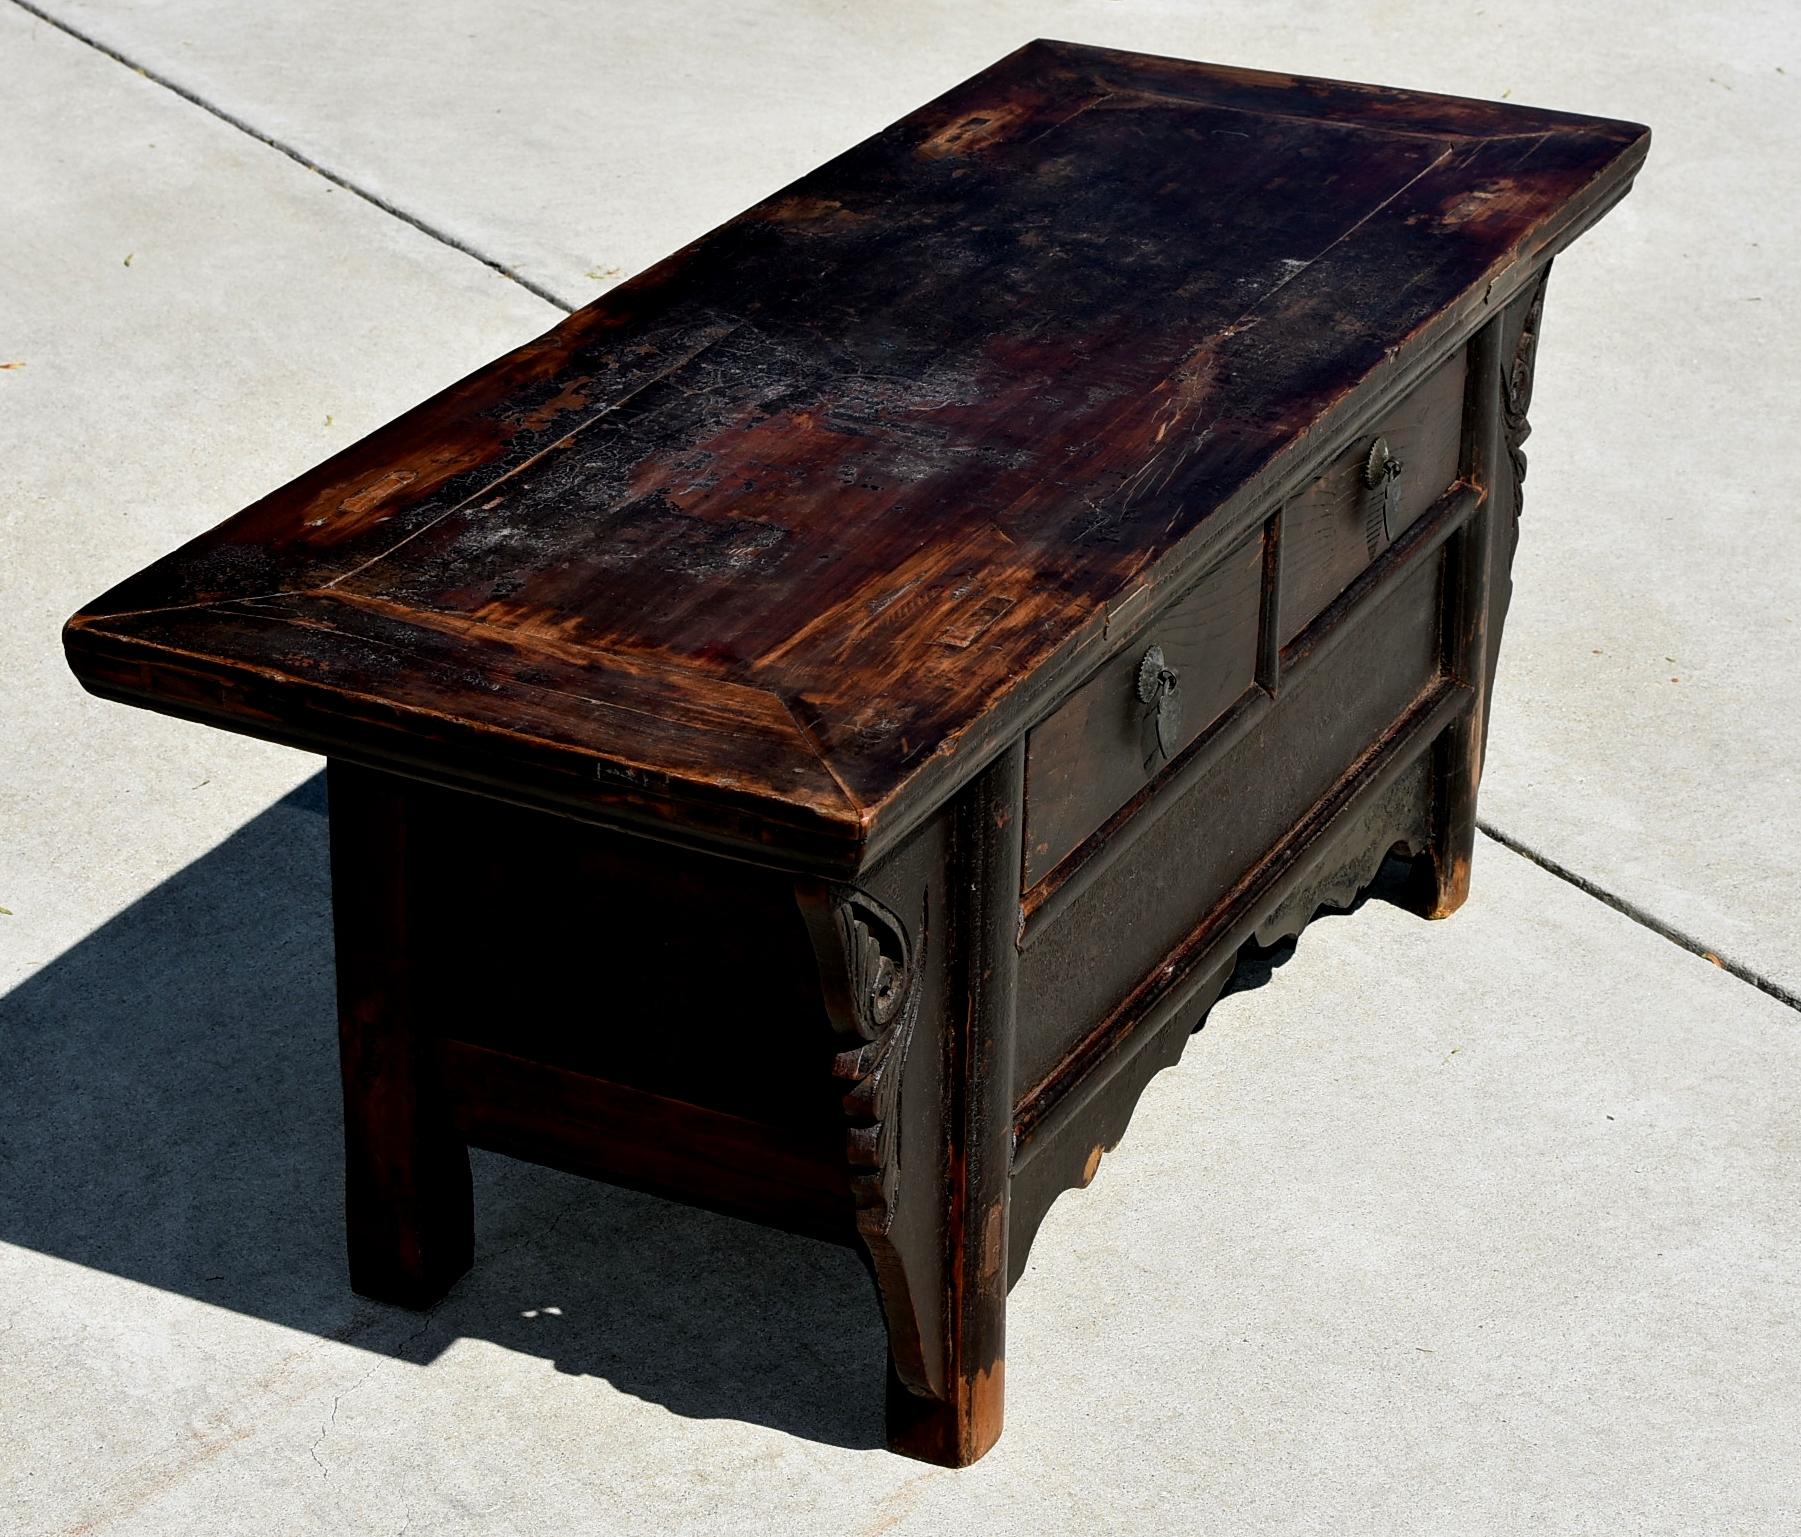 Wood Low Meditation Table Chest with Secret Compartment, Chinese Antique